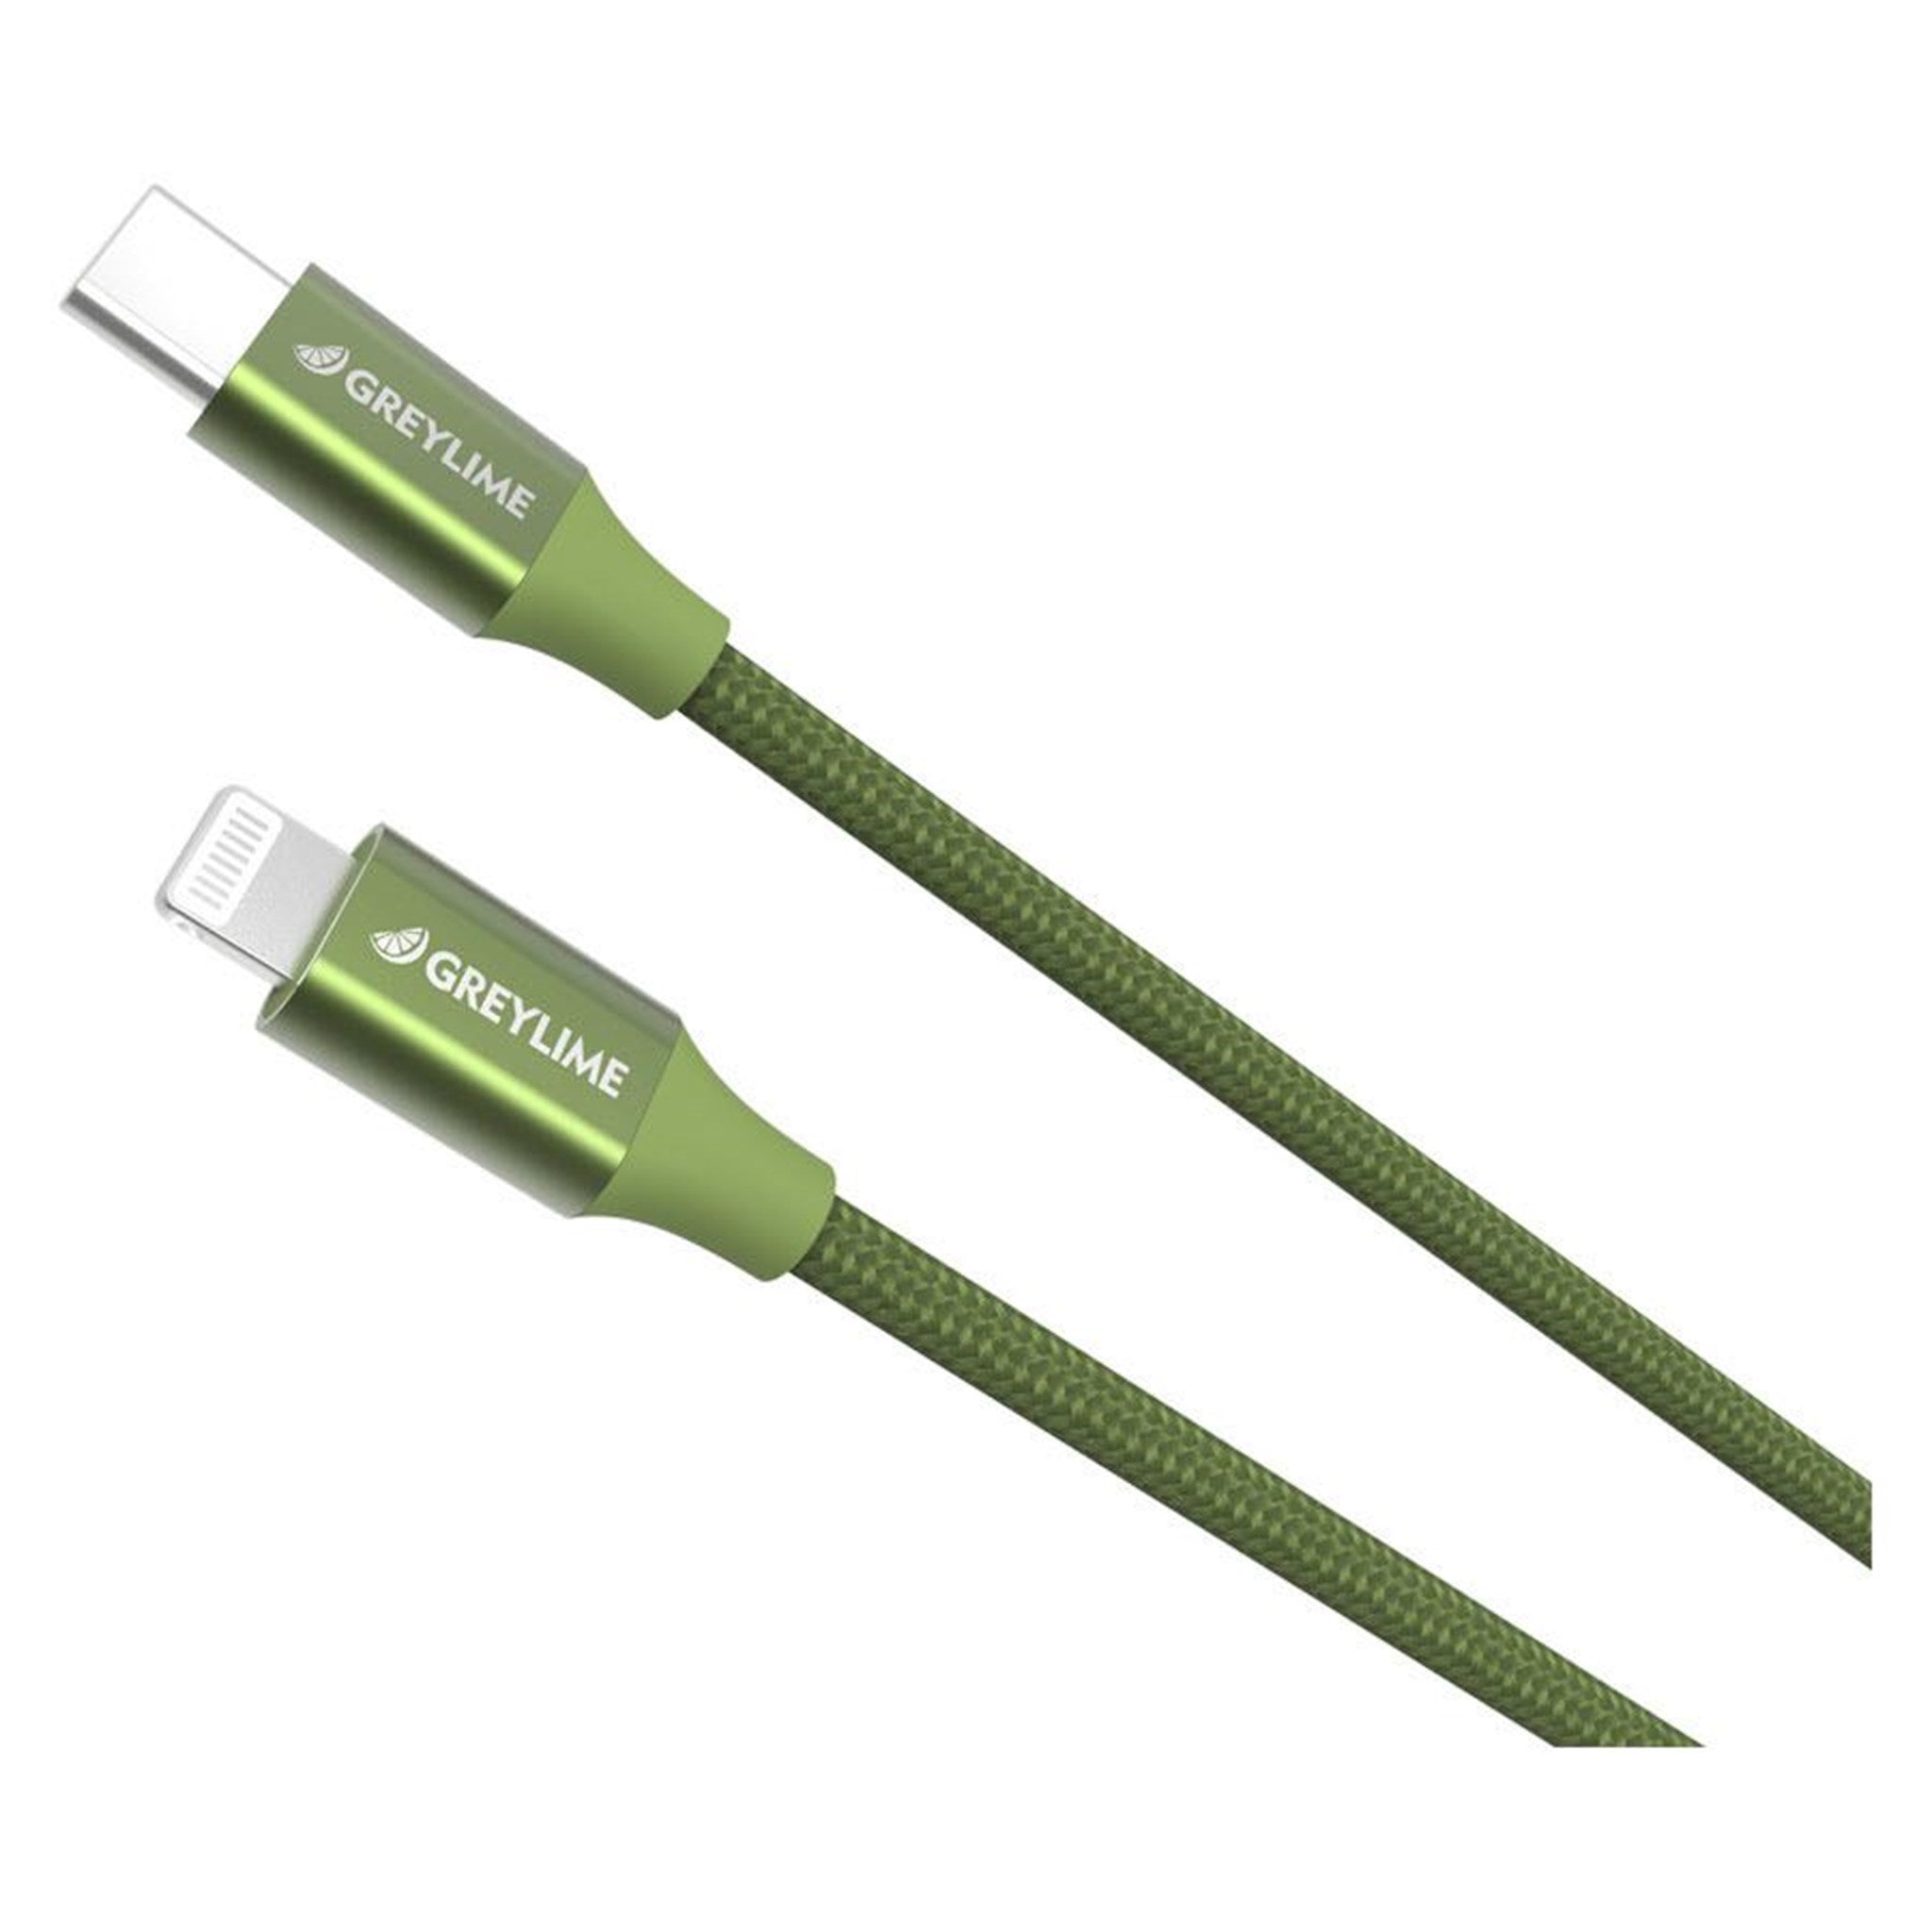 C21CL2M03-GreyLime-Braided-USB-C-to-Lightning-Cable-Groen-2-m_02.jpg